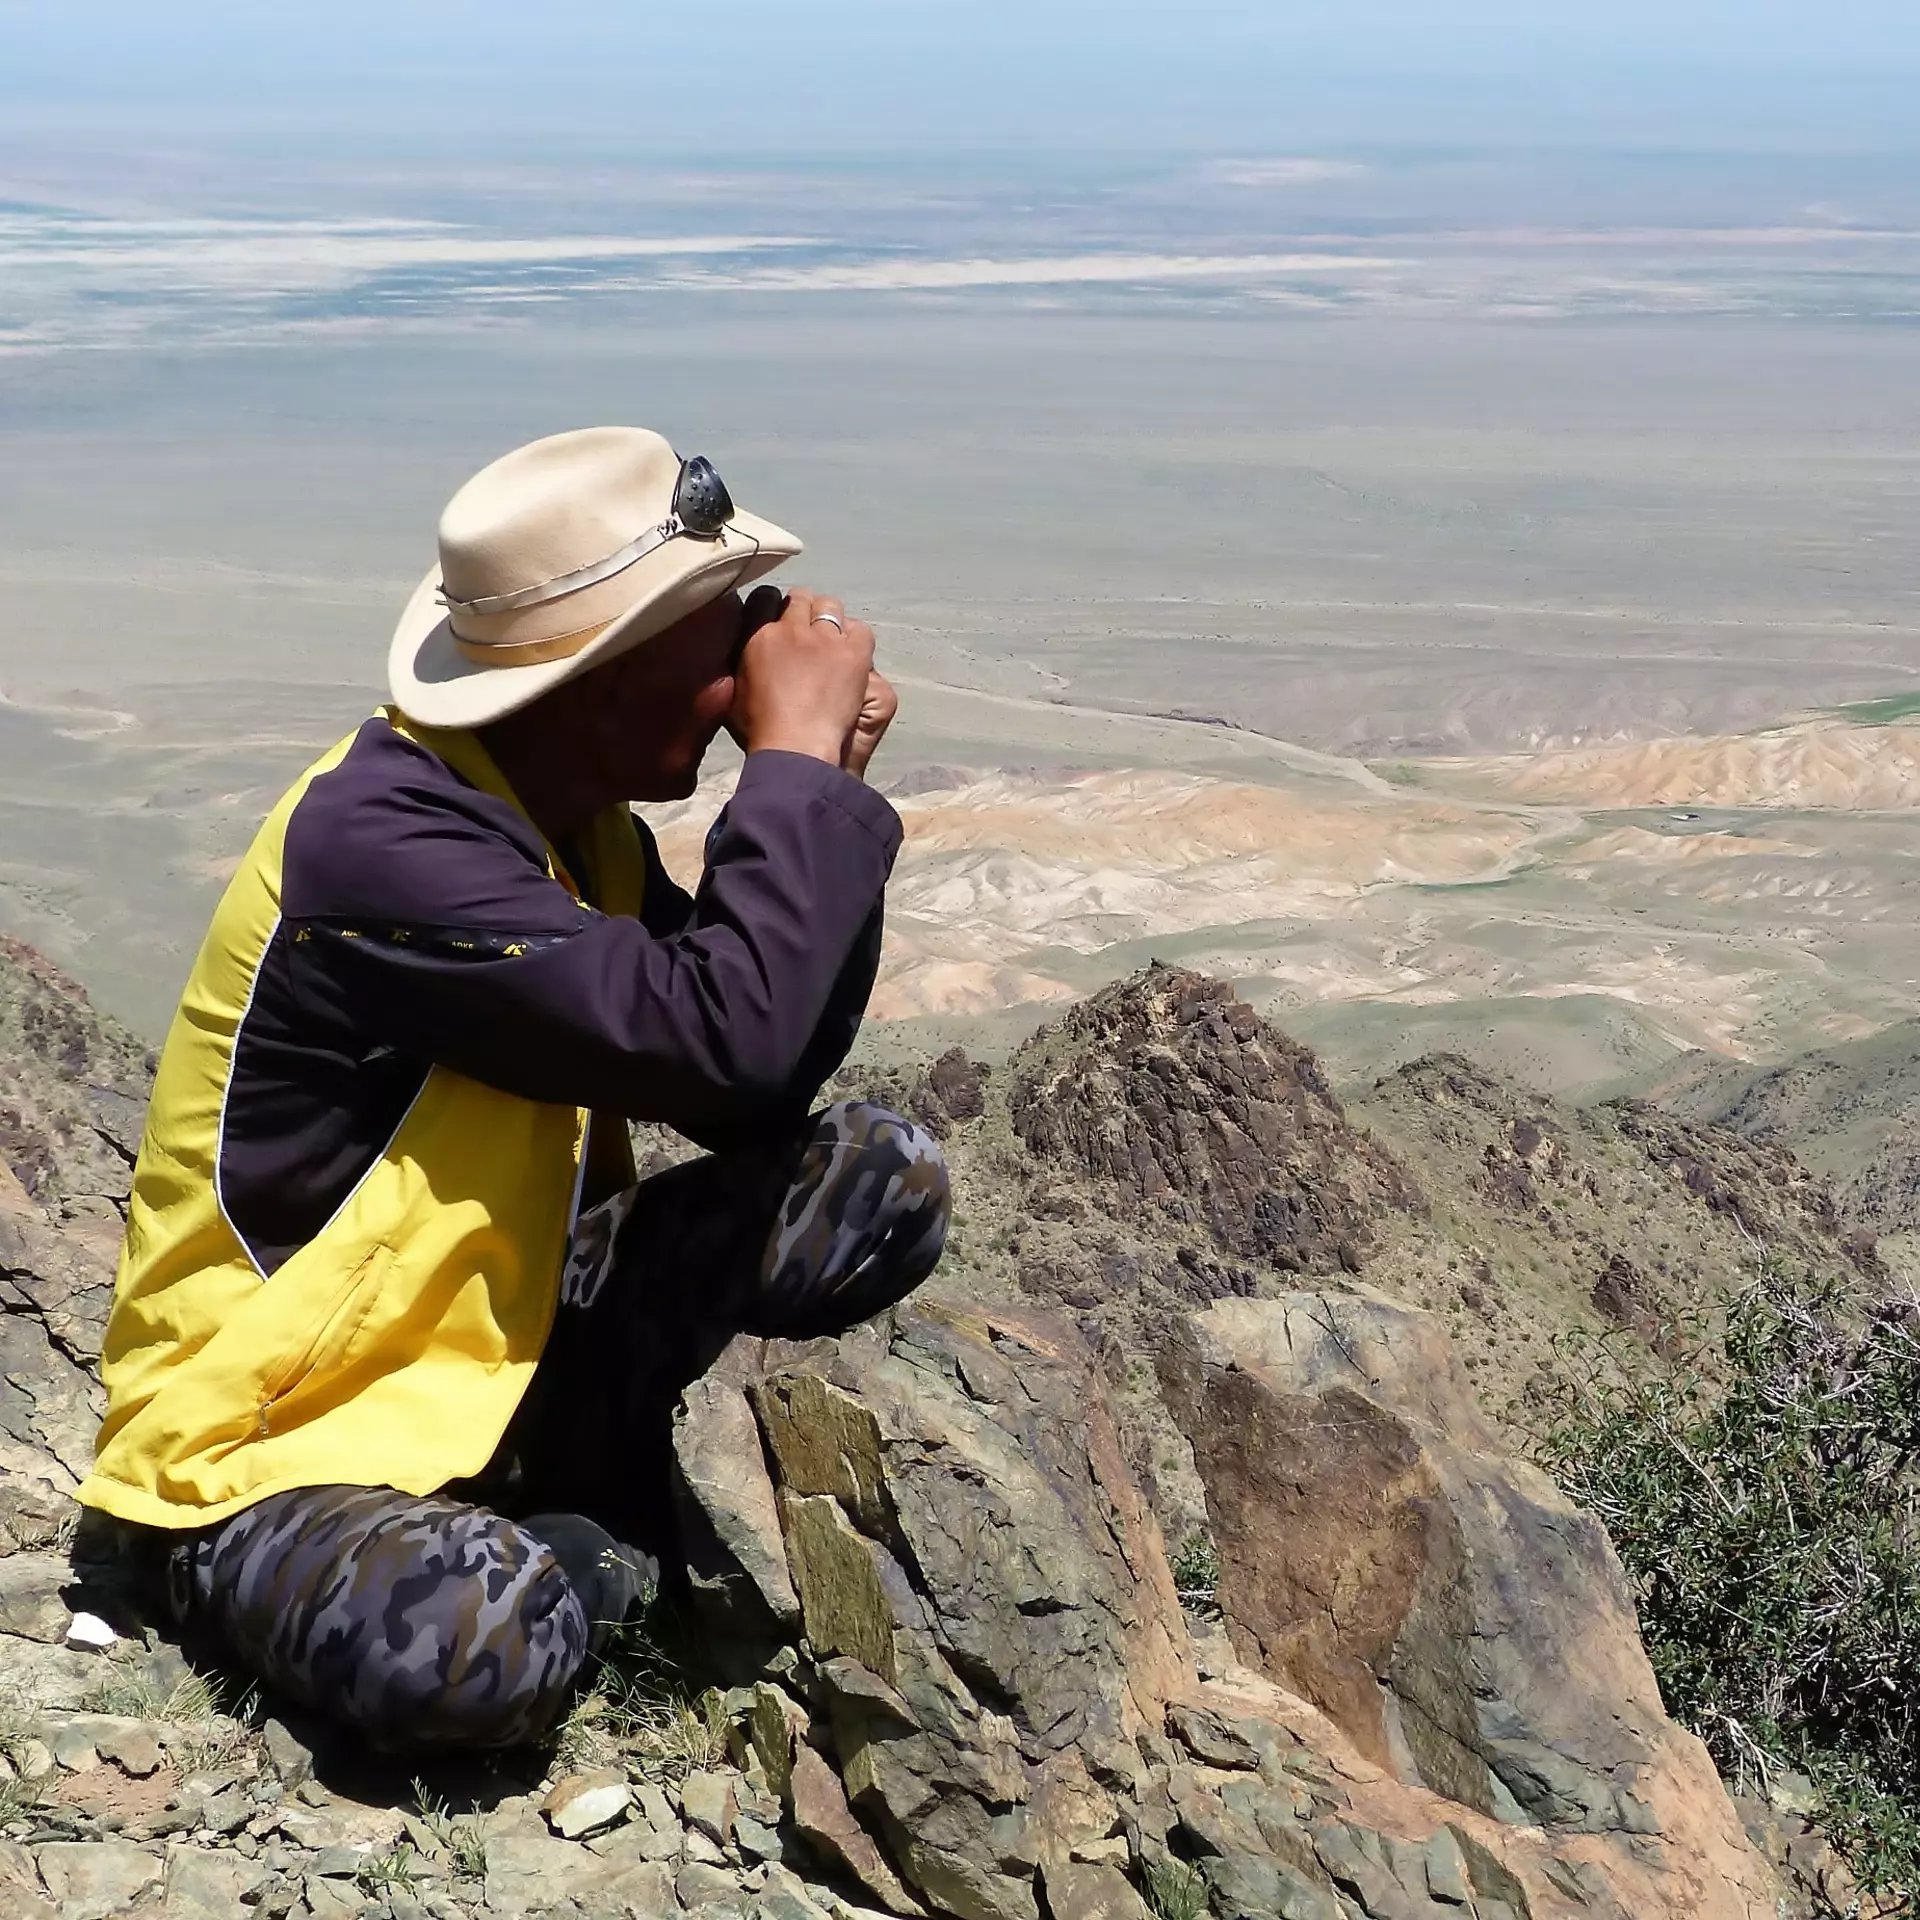 ZSL conservationist looking out with binoculars across Mongolian steppe plains